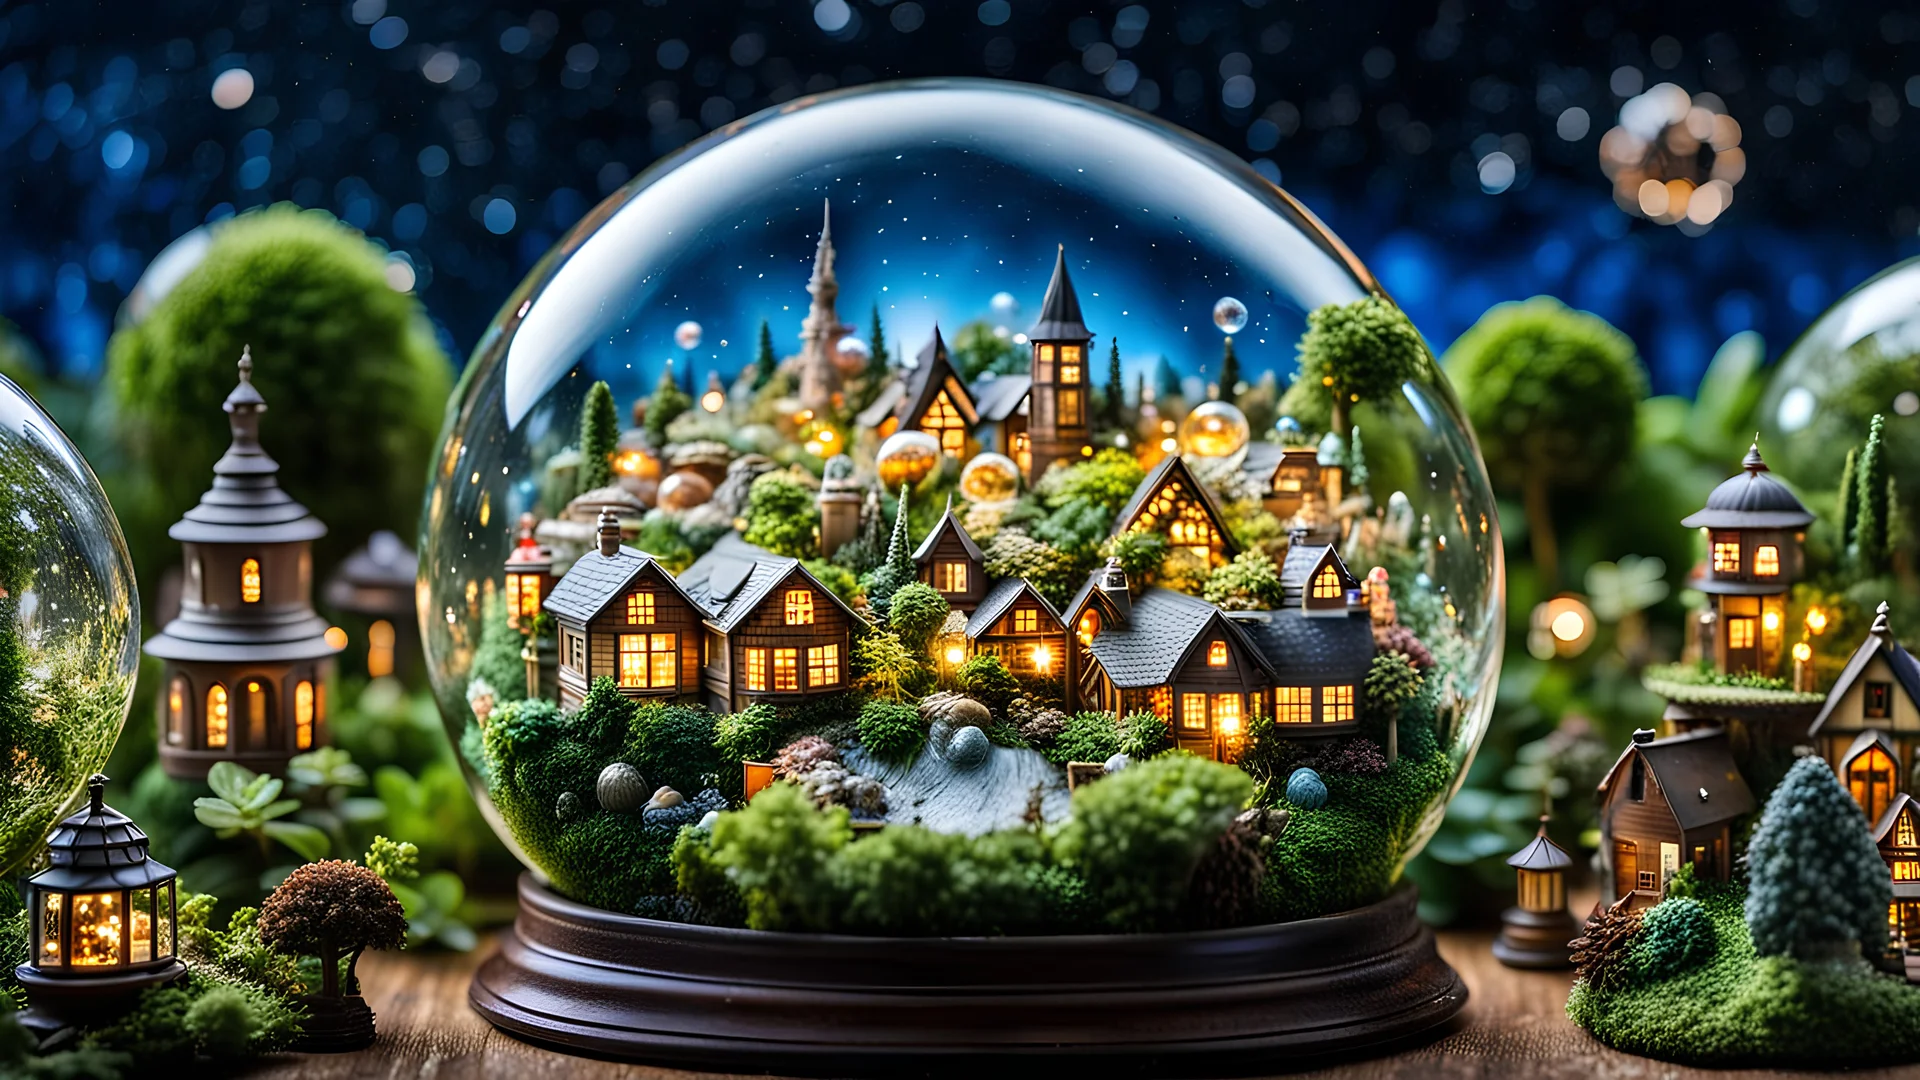 many glass ball with miniature detailed vintage small town in a glass sphere, surrounded by several other glass spheres, in each glass sphere a different city, village, or magical forest, wonderful miniature garden, tiny fantasy figures, miniature buildings in another transparent sphere, in the background the dim big cosmos with stars surrounds everything, beautifully shot, hyperrealistic, sharp focus, 64 megapixels, perfect composition, high contrast, cinematic, atmospheric, moody